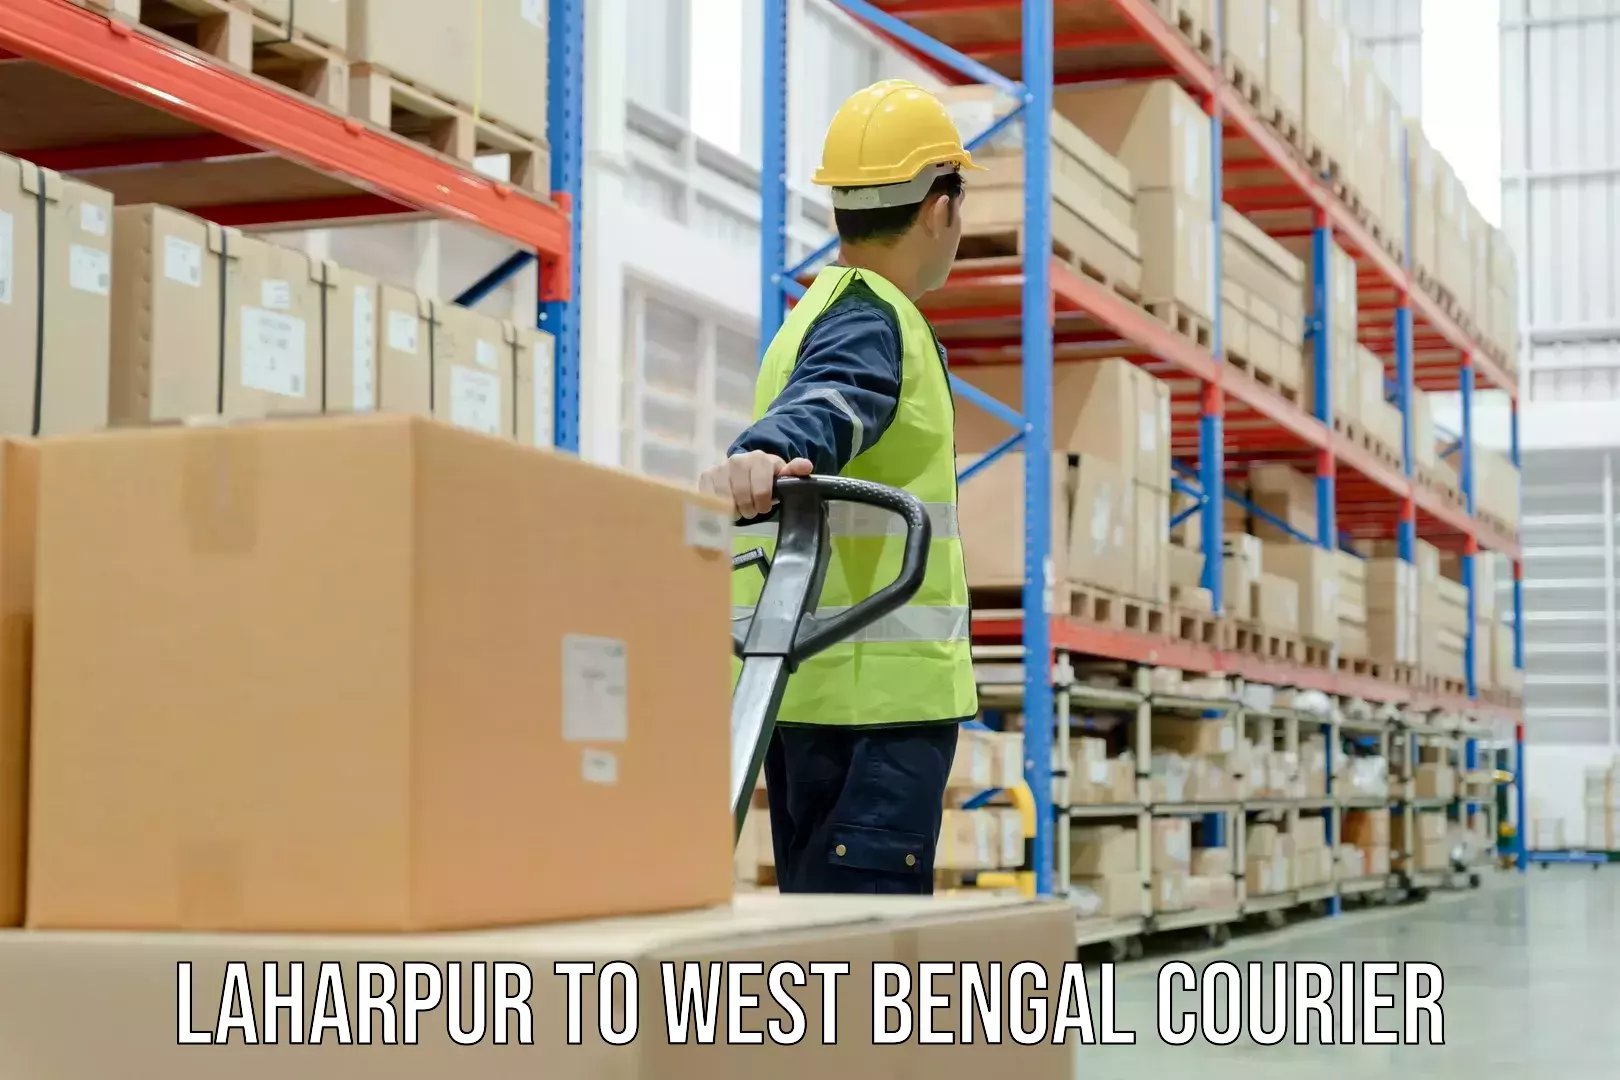 Budget-friendly shipping Laharpur to West Bengal